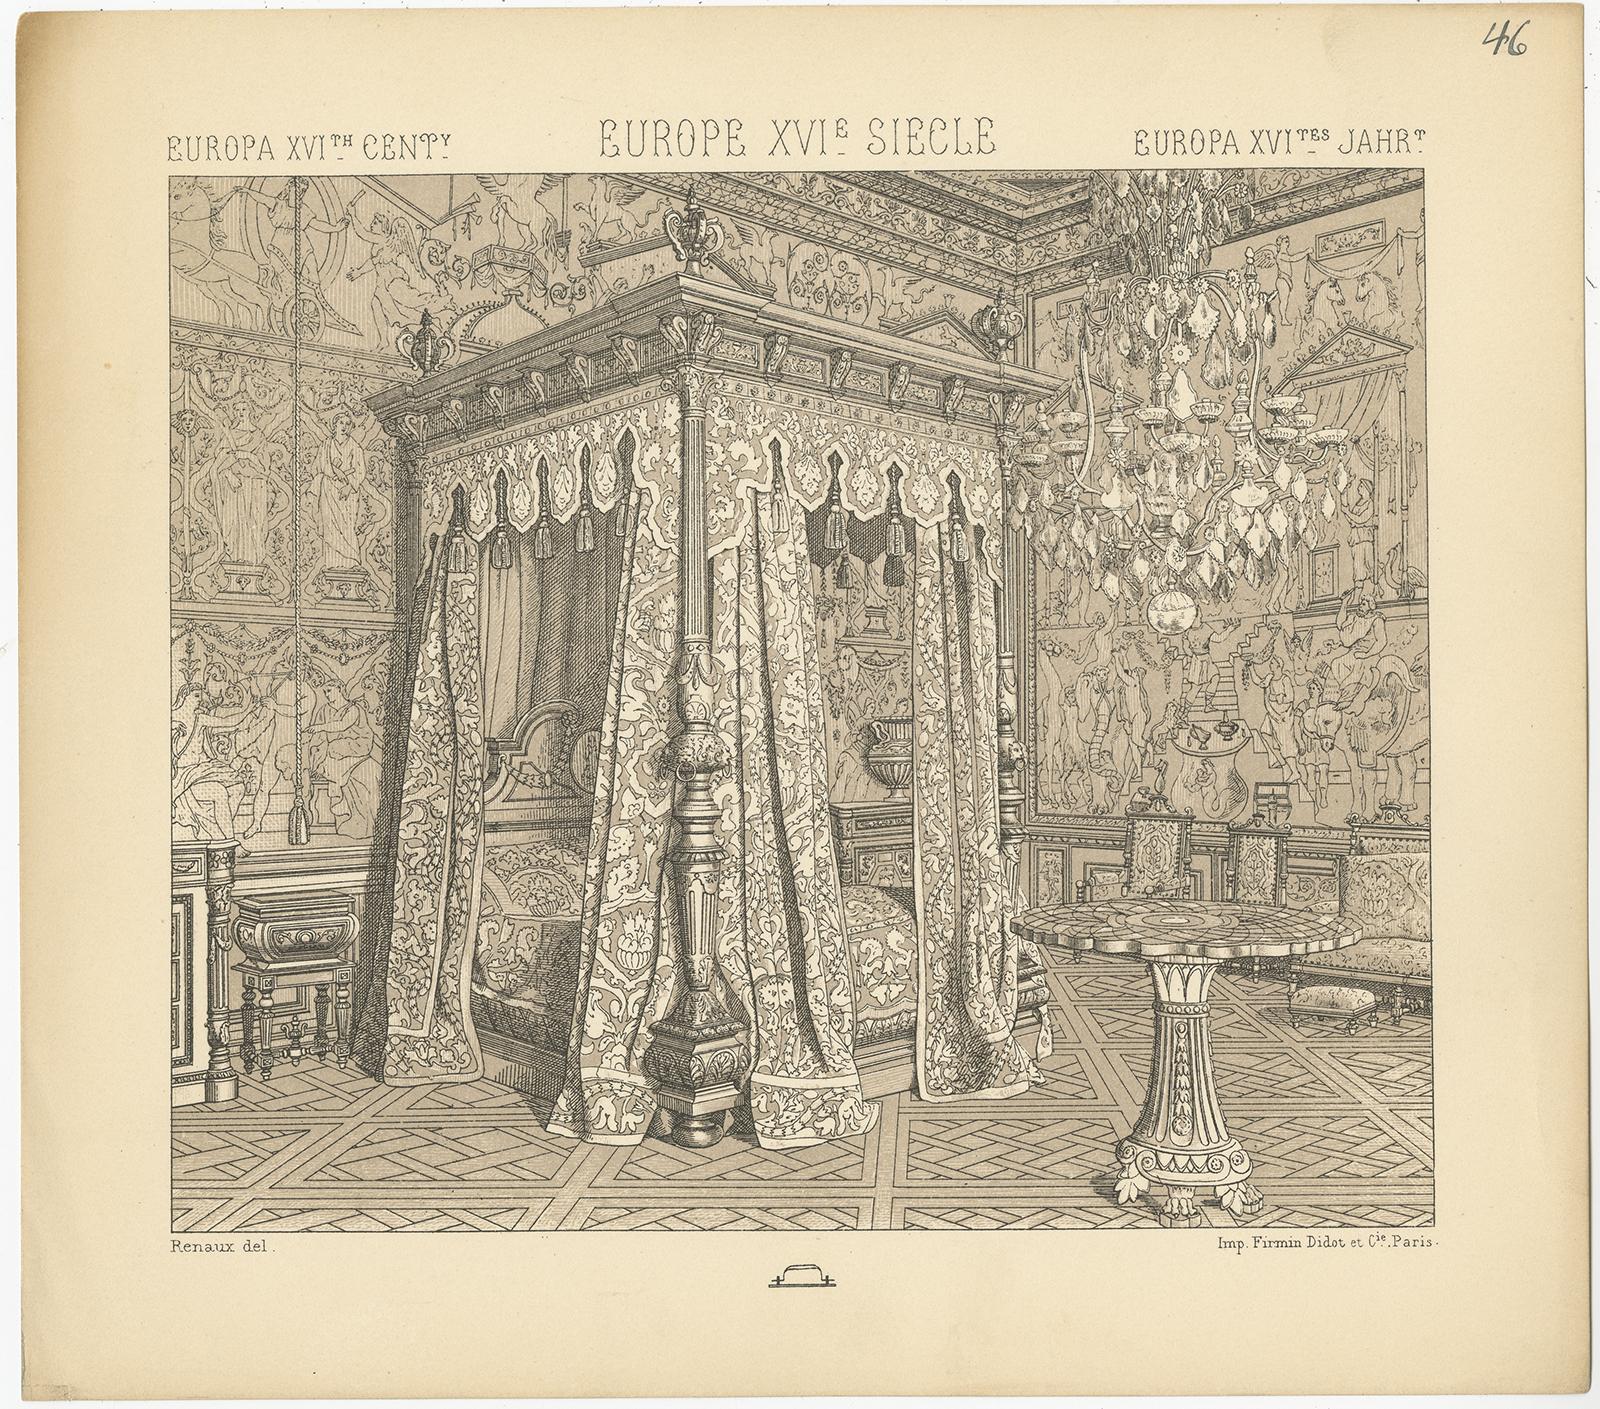 Antique print titled 'Europa XVIth Cent - Europe XVIe, Siecle - Europa XVItes Jahr'. Chromolithograph of European 16th century bedroom. This print originates from 'Le Costume Historique' by M.A. Racinet. Published circa 1880.